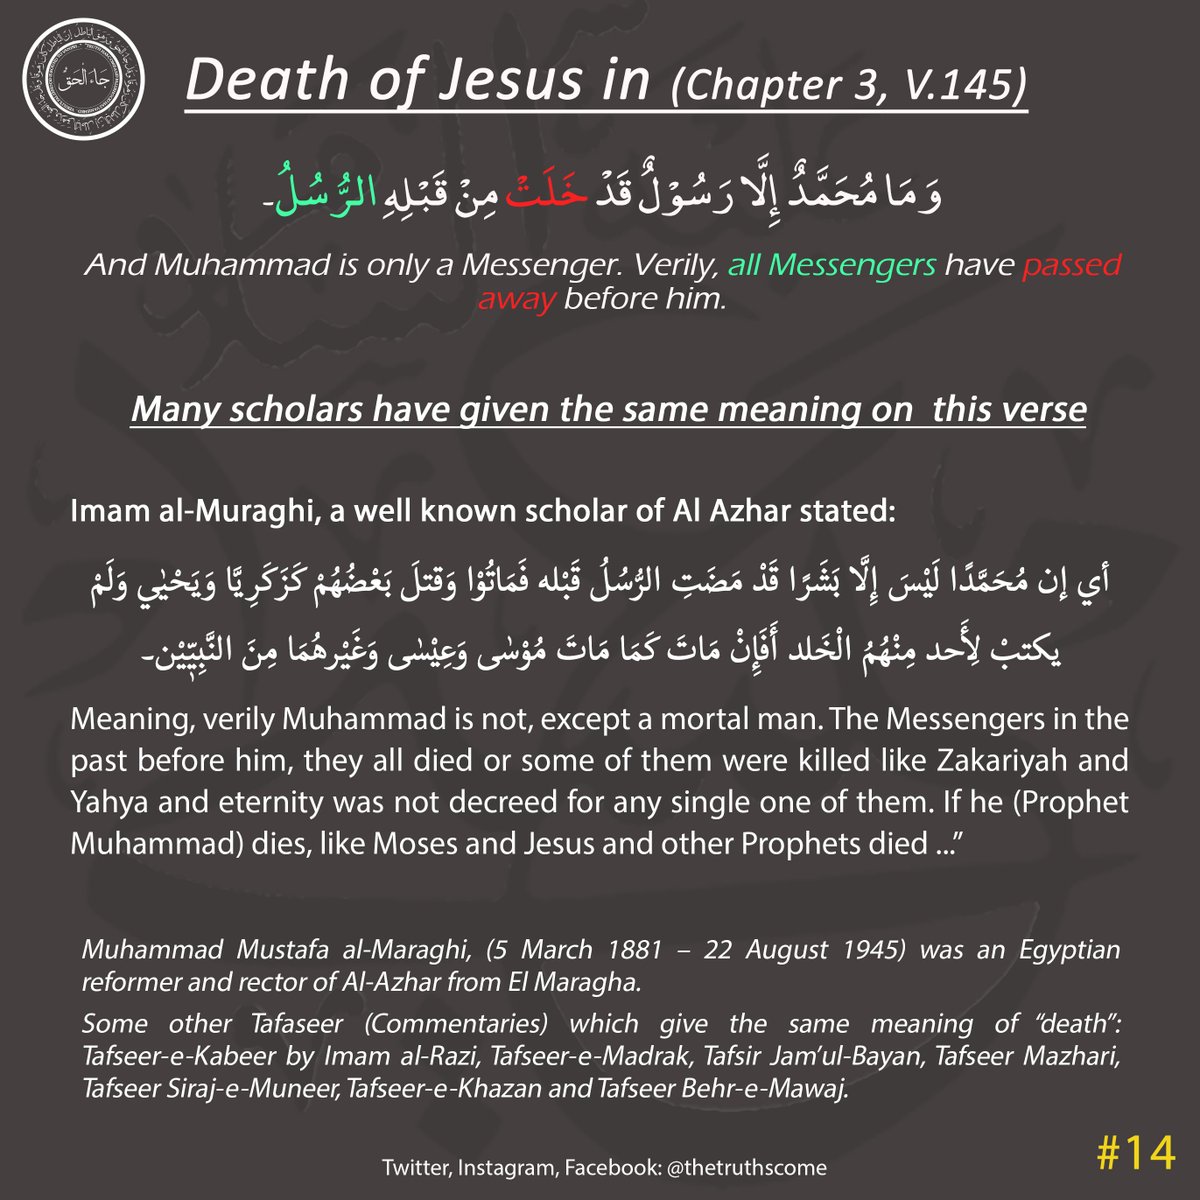 Many Scholars have given the same meaning (of Ch.3, v.145) in the Holy Quran. And no one excluded Jesus(as). All Prophets have passed away.